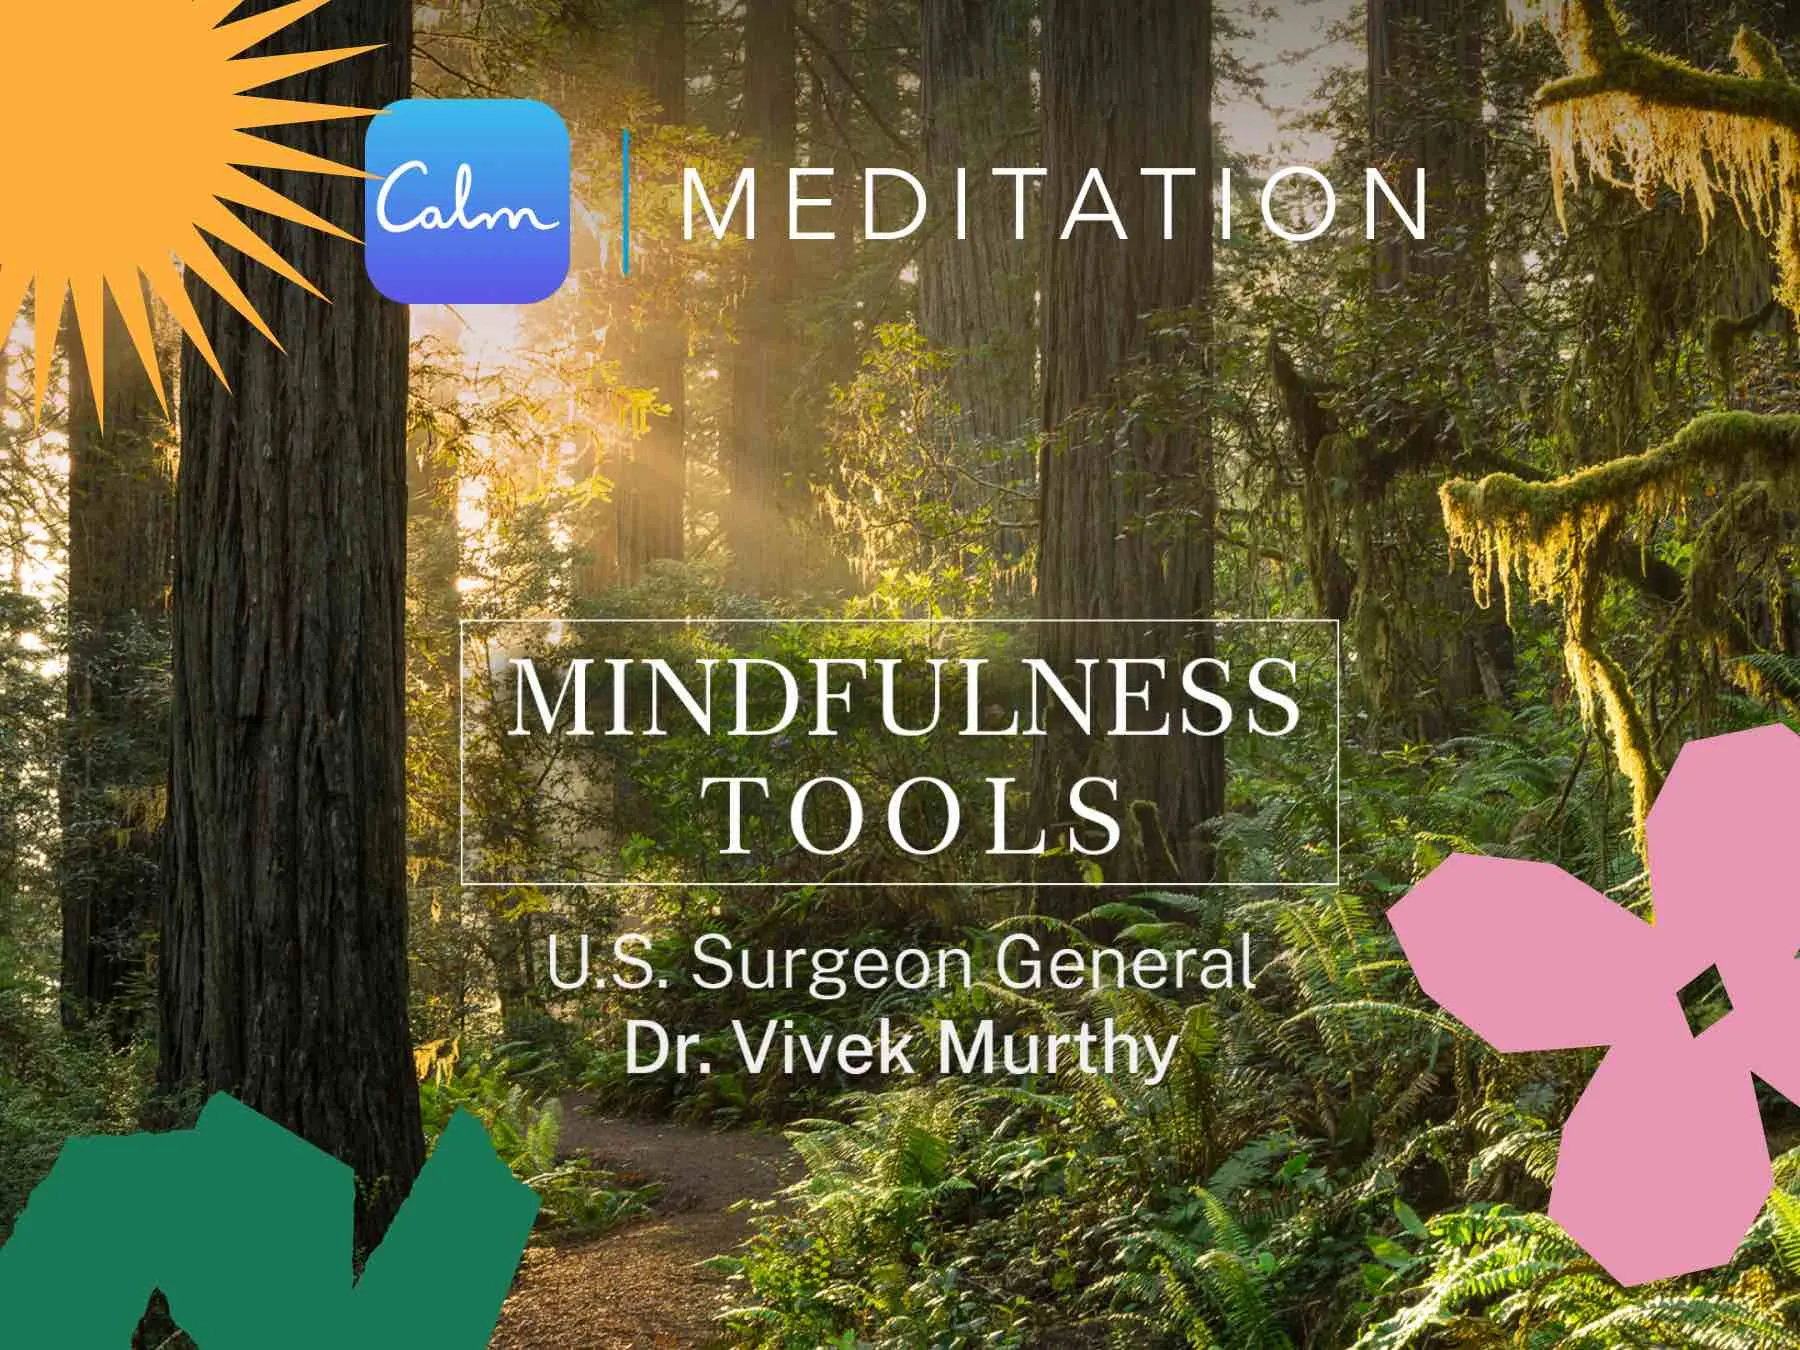 Calm Meditation, mindfulness tools with U.S. Surgeon General Dr. Vivek Murthy. A peaceful forest in the background